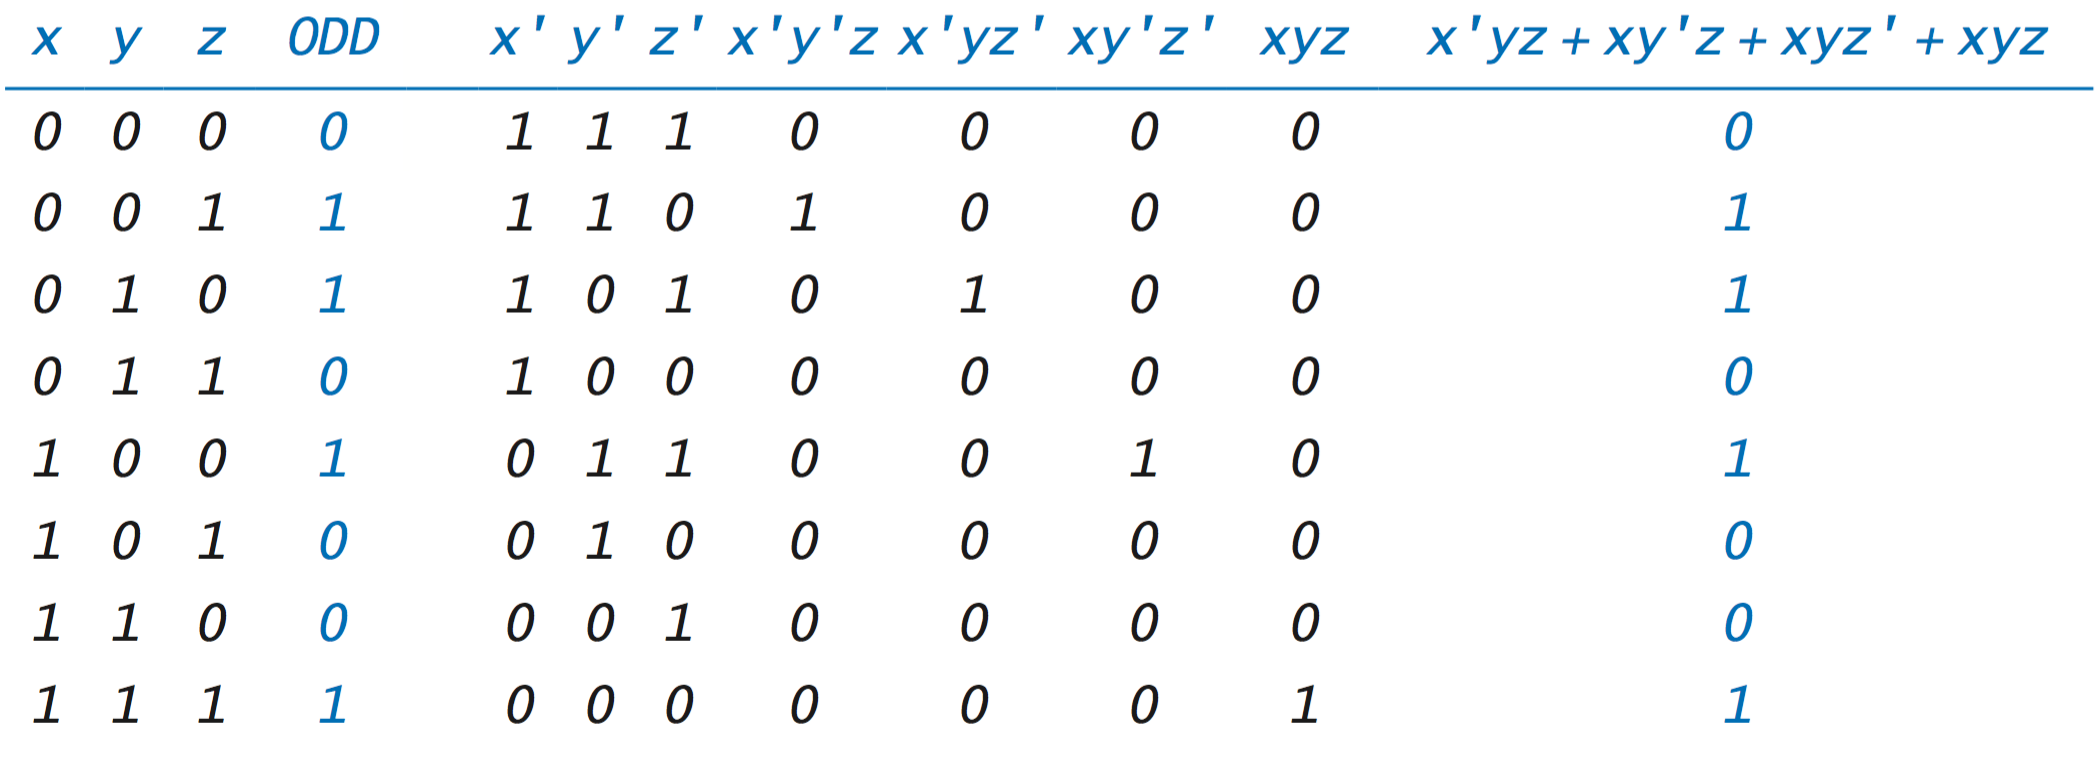 Truth-table proof of the sum-of-products representation of ODD(x, y, z)